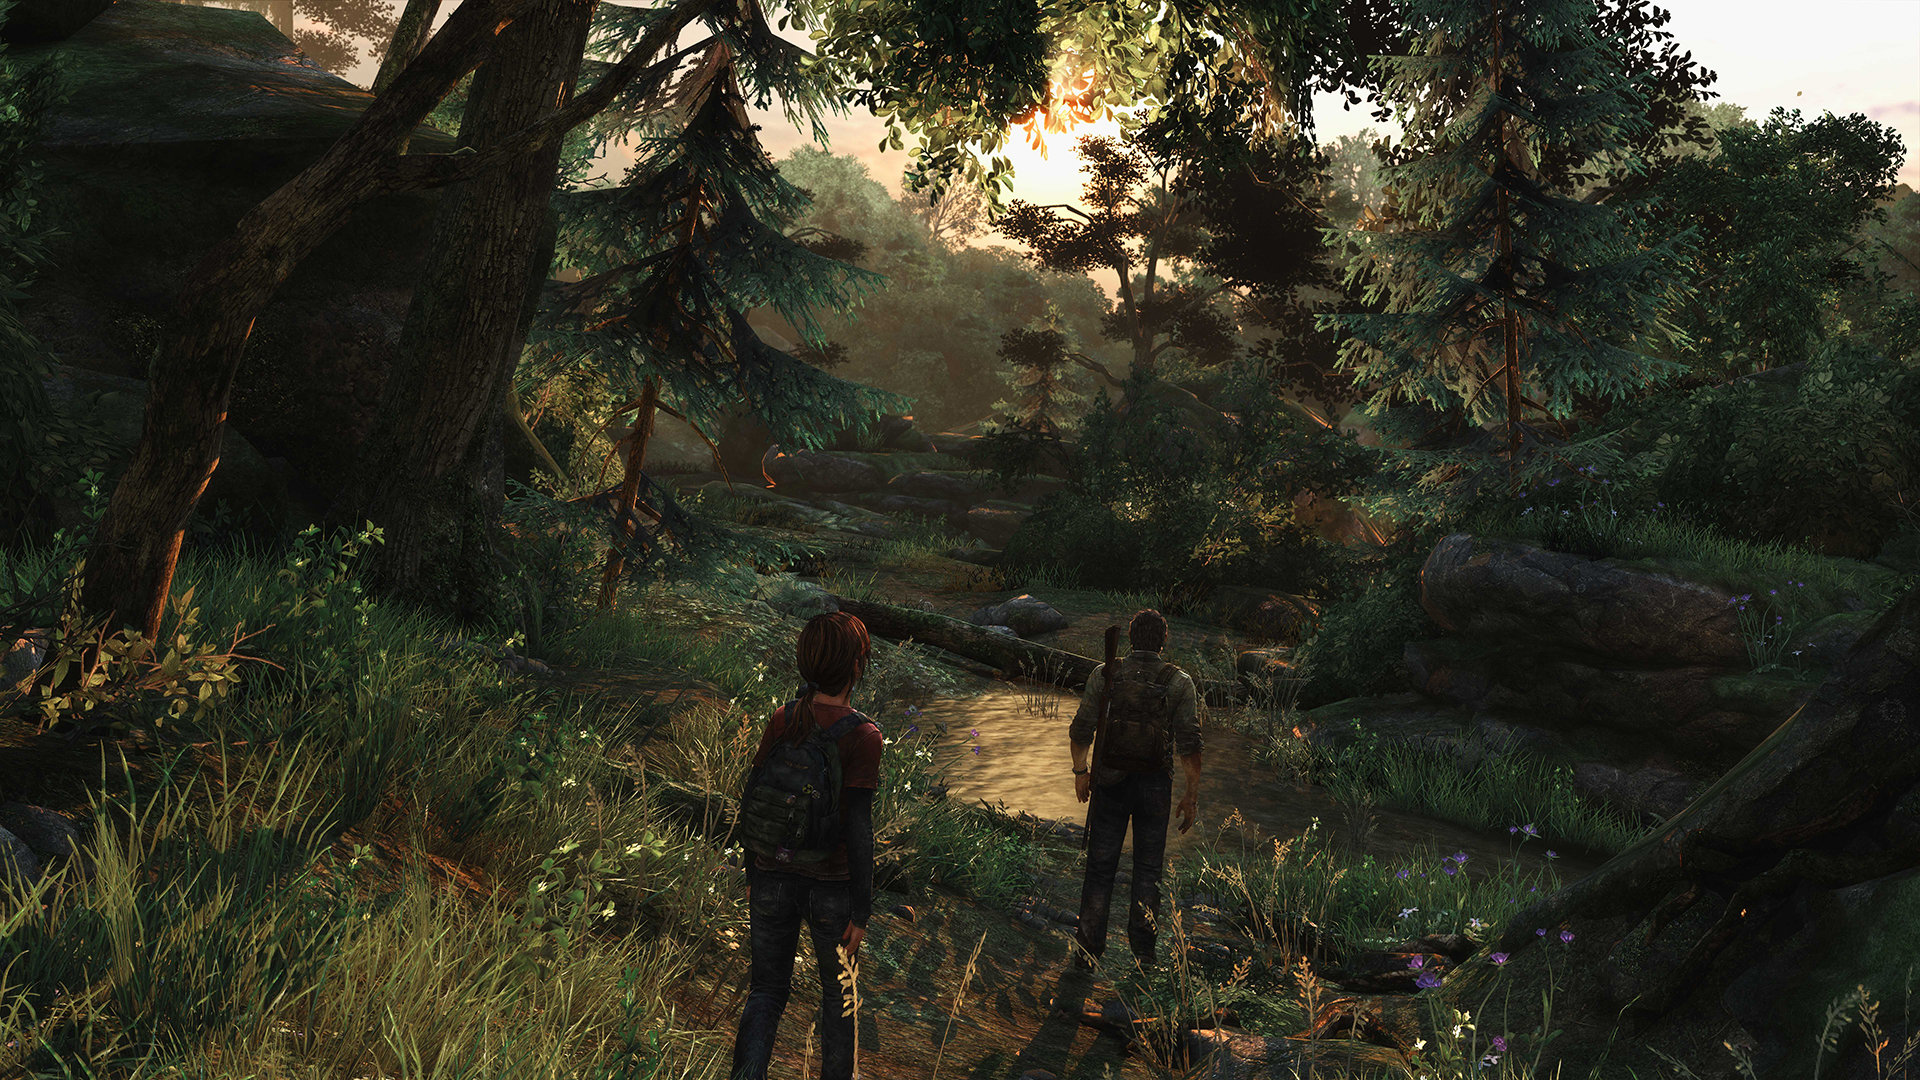 Last best games. The last of us. The last of us игра. The last of us 1. The last of us Forest.